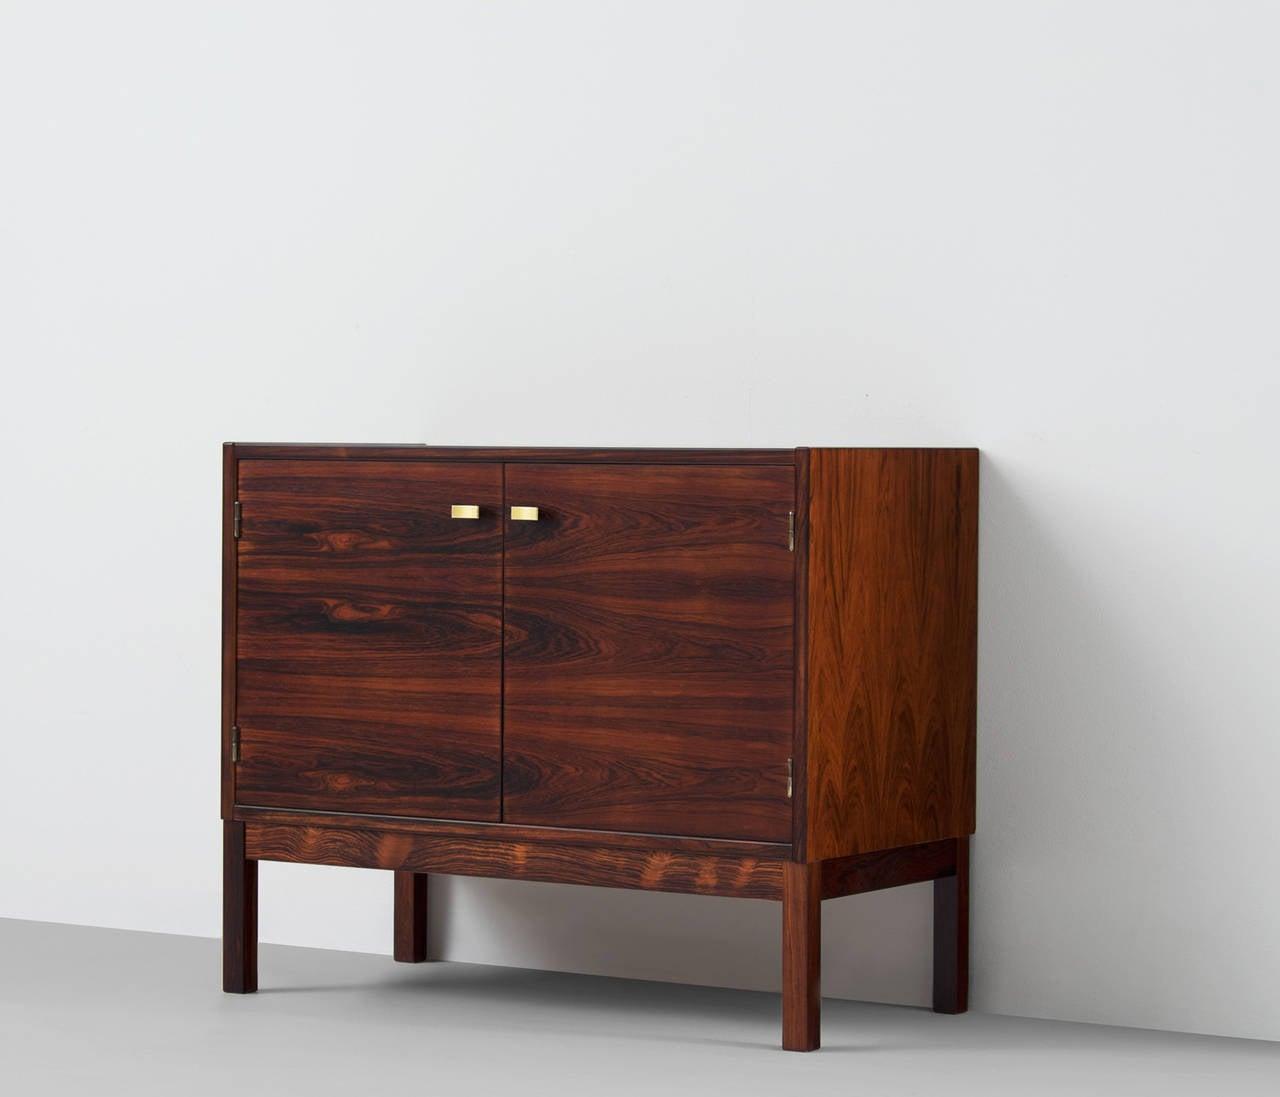 Wonderful designed compact rosewood console or sideboard. 

This highly refined small cabinet has some beautiful brass details and is very well manufactured. Excellent combination of shapes and materials.
